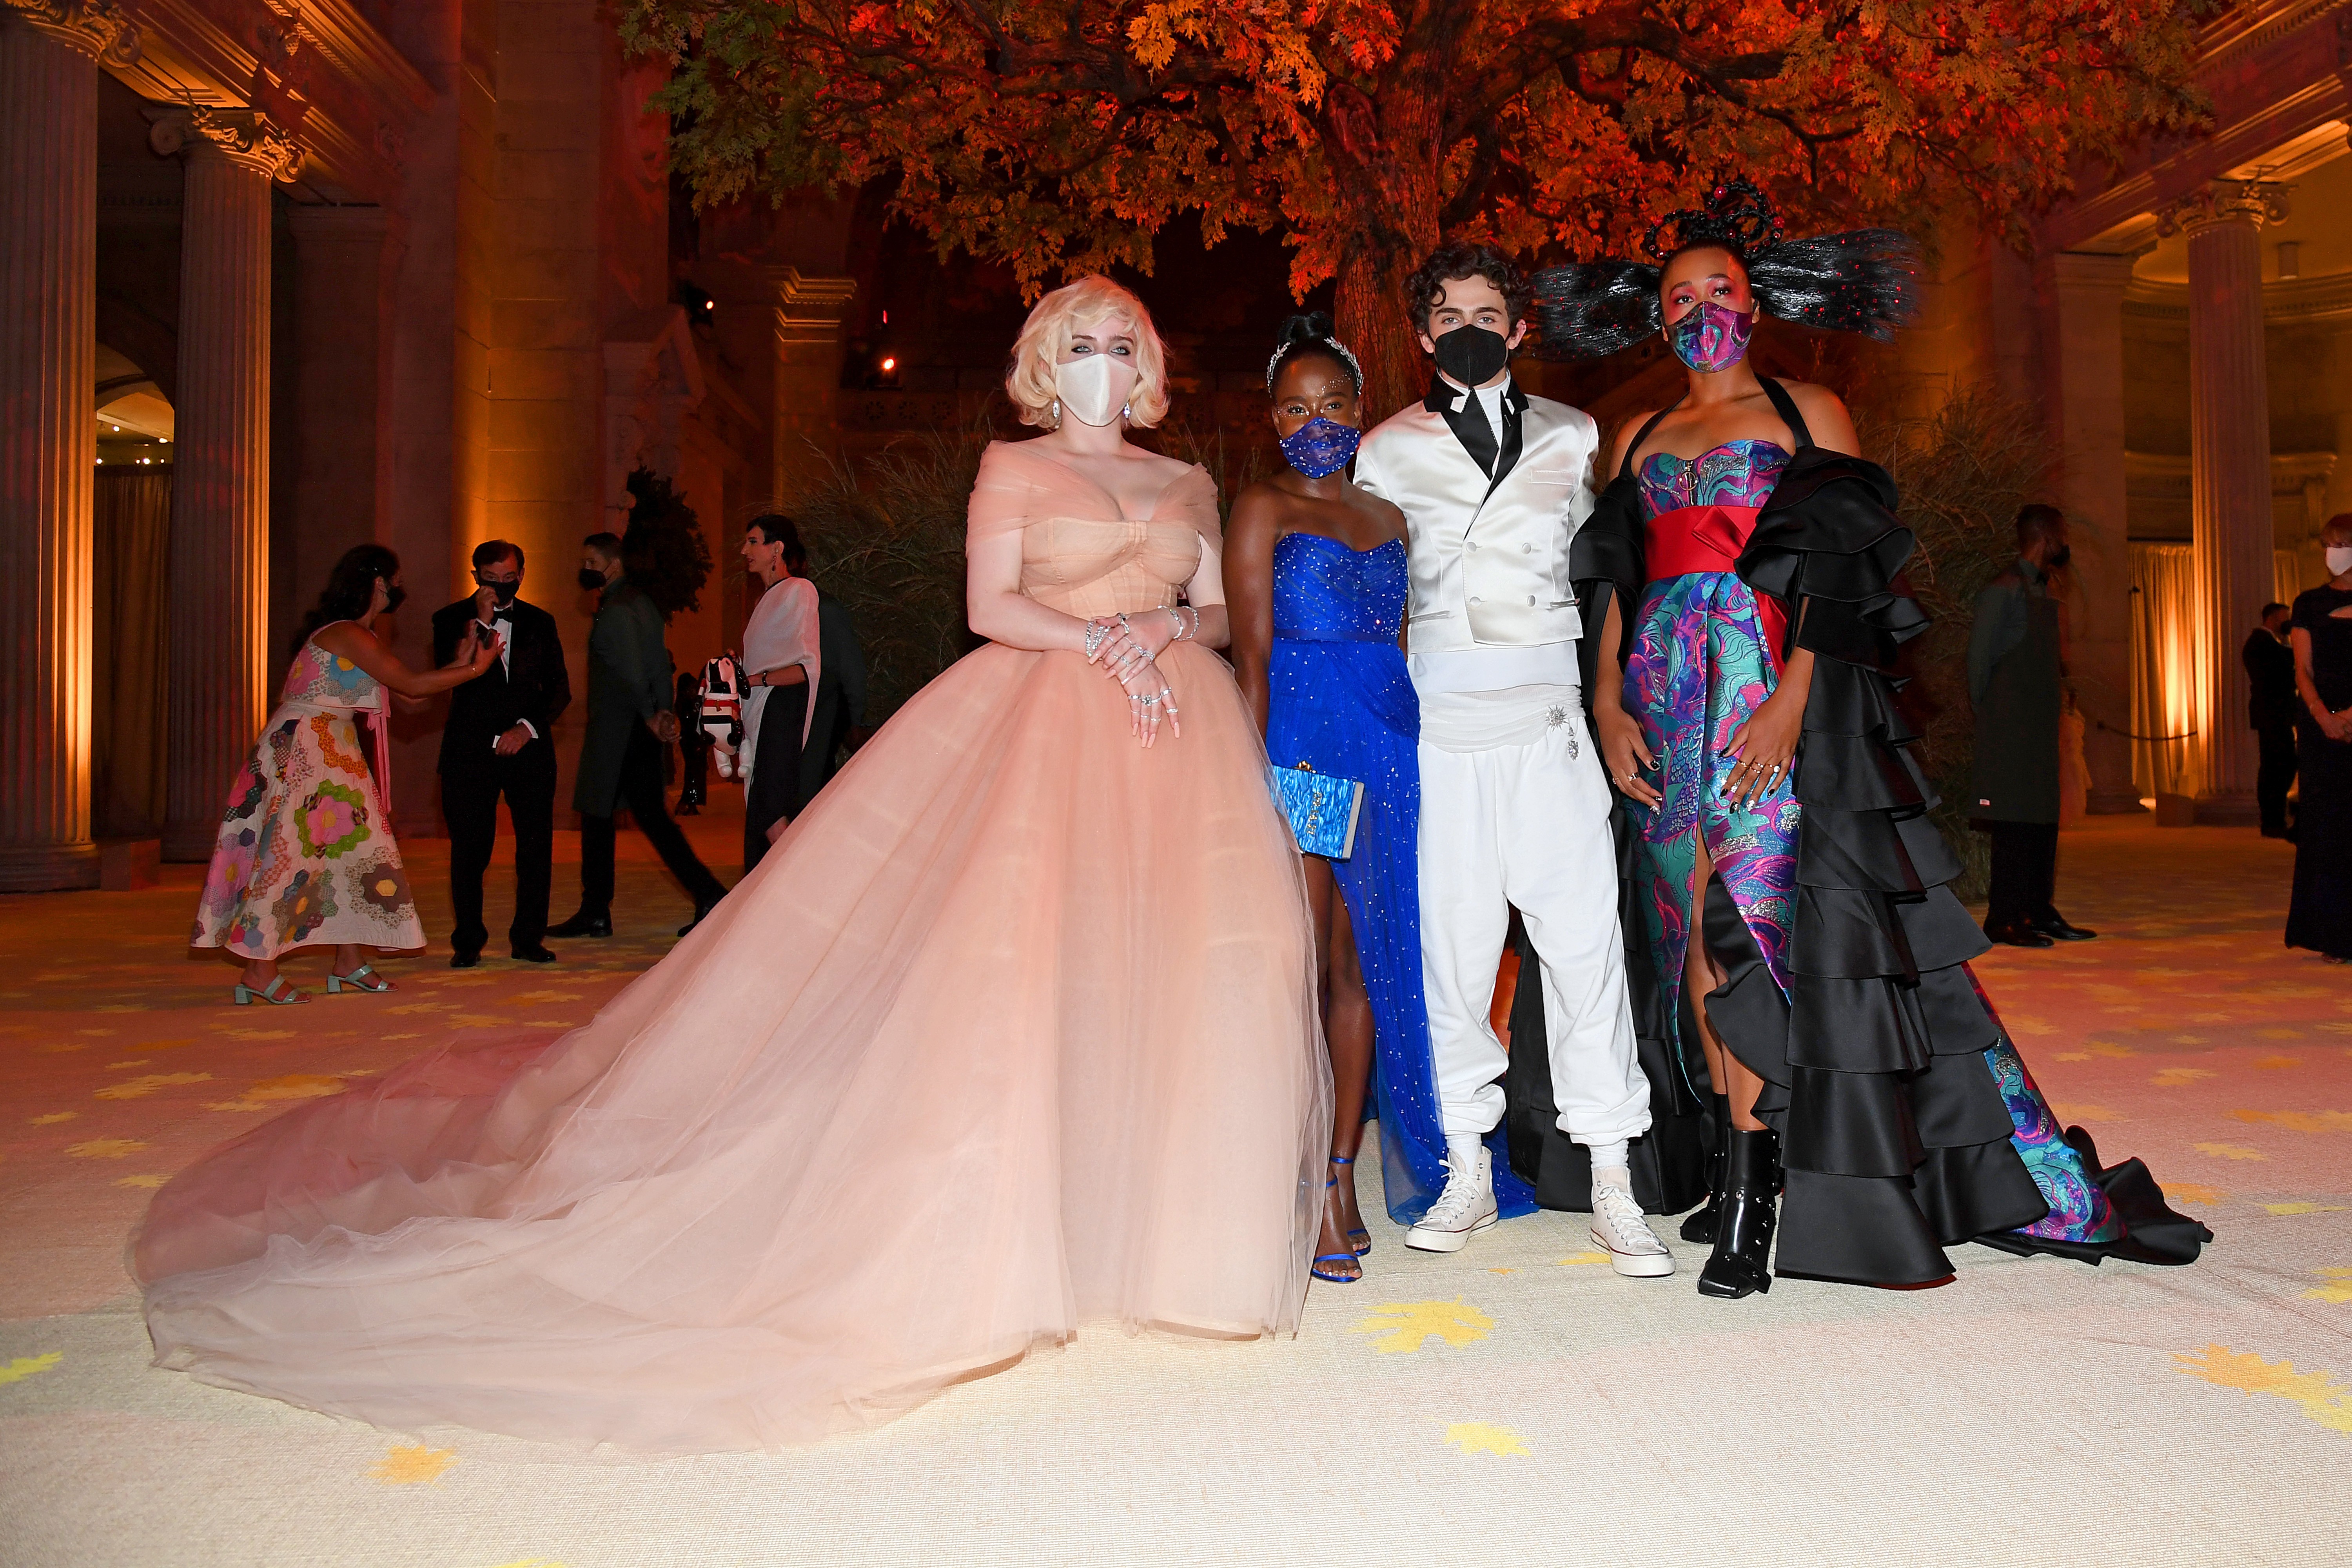 NEW YORK, NEW YORK - SEPTEMBER 13: (EXCLUSIVE COVERAGE) (L-R) Co-Chairs Billie Eilish, Amanda Gorman, Timothée Chalamet, and Naomi Osaka attend the The 2021 Met Gala Celebrating In America: A Lexicon Of Fashion at Metropolitan Museum of Art on September 1 (Foto: Getty Images for The Met Museum/)